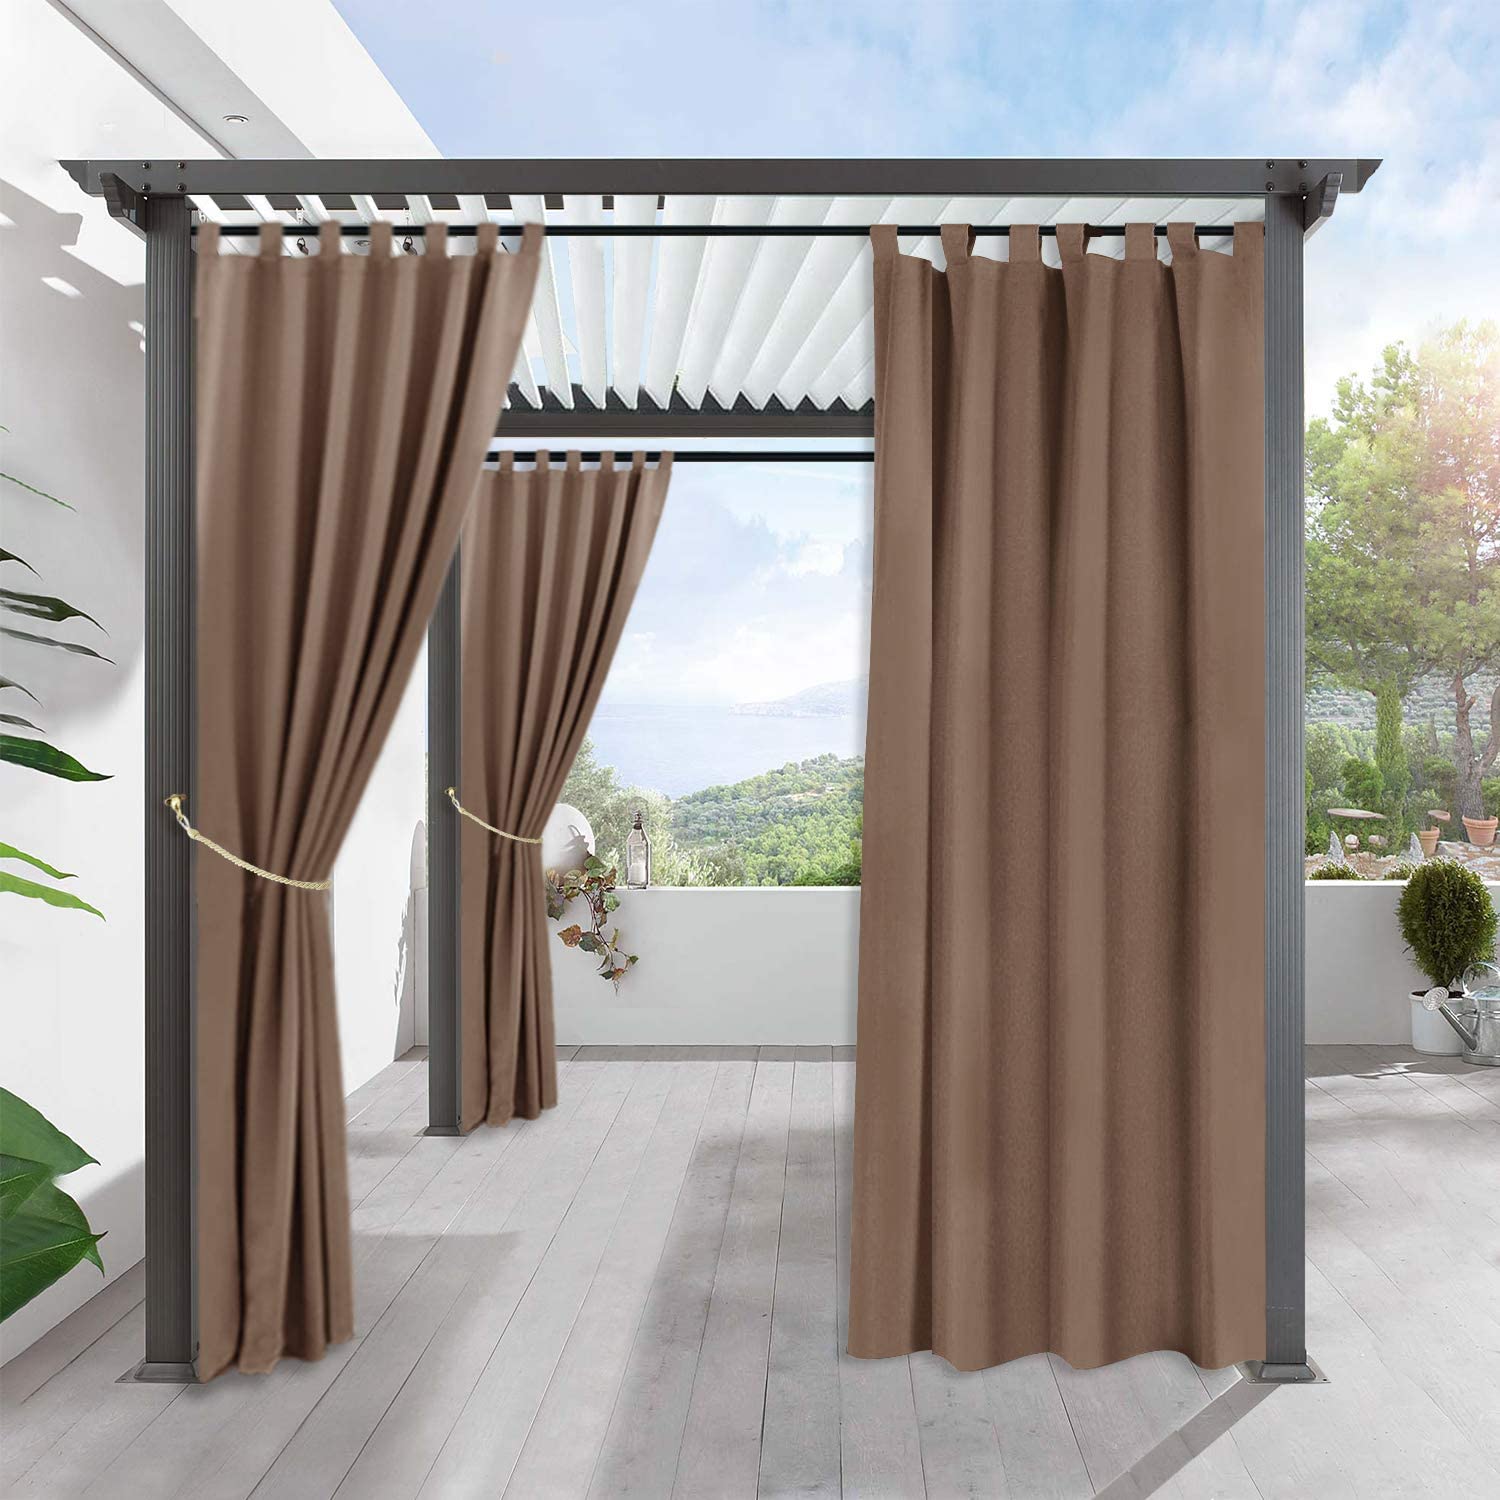 Pro Space Water & Wind Resistant Outdoor Curtain Thermal Insulated Grommets on Top and Bottom 50 W x 120 L Privacy Panel Drapery for Patio Porch Gazebo Cabana Beige 